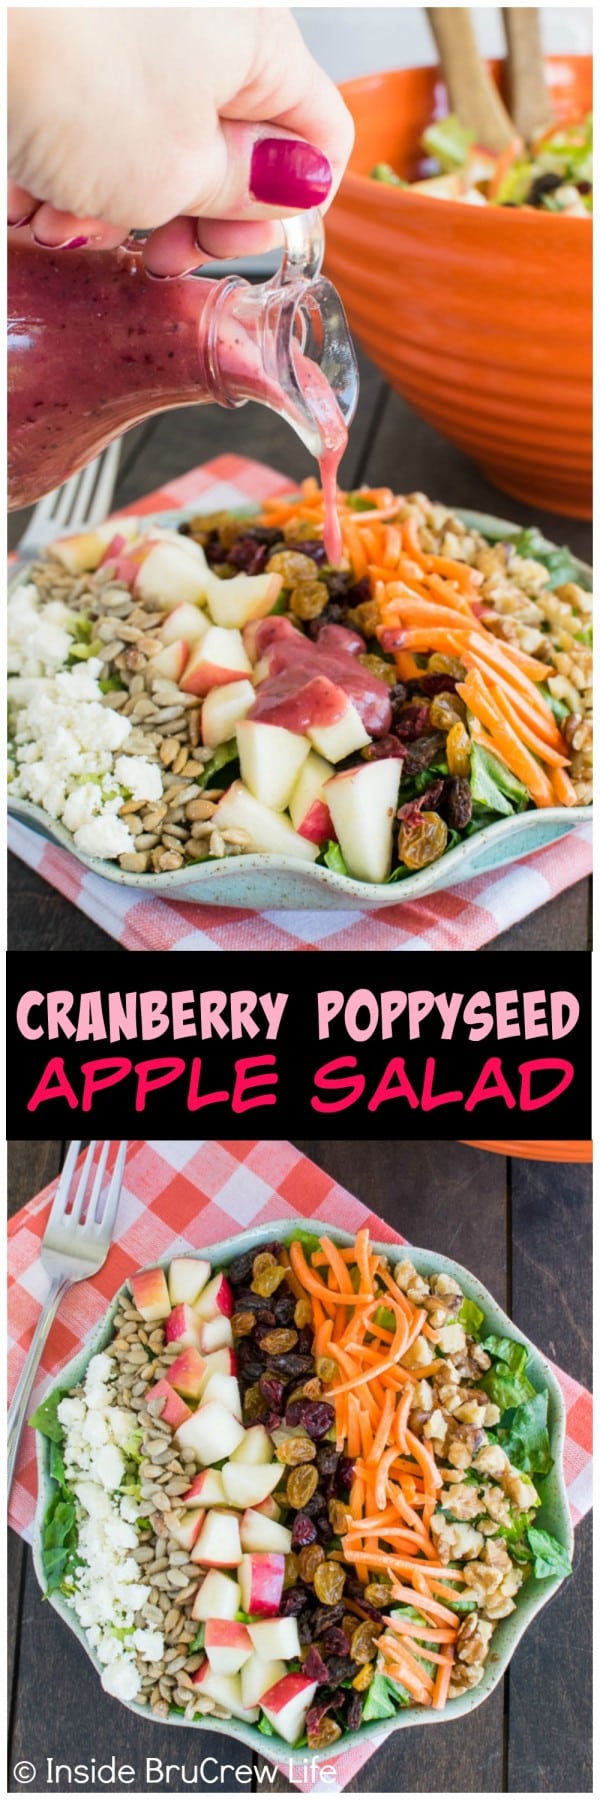 Cranberry Poppyseed Apple Salad - fruit and nuts add a fun crunch to this delicious salad recipe. It's a delicious recipe for picnics or dinner parties.